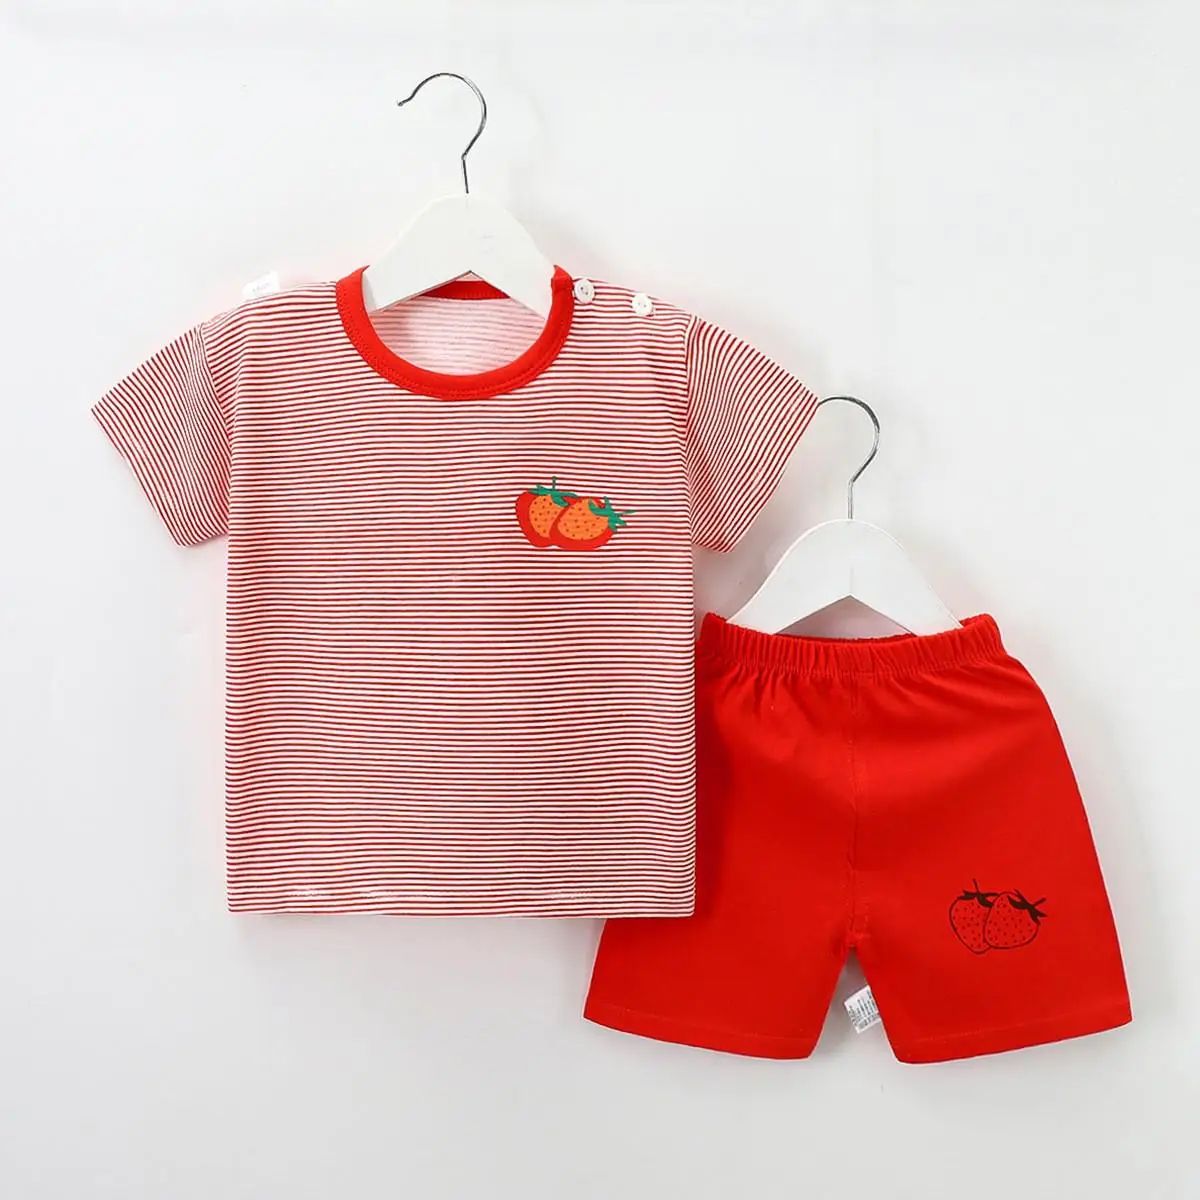 0-4years  Chirldren Summer Outfits T-shirt+shorts Boys And Girls  Loose Casual Cartoon Clothes Stripe O-neck 2pcs Sets Simple newborn baby clothing set